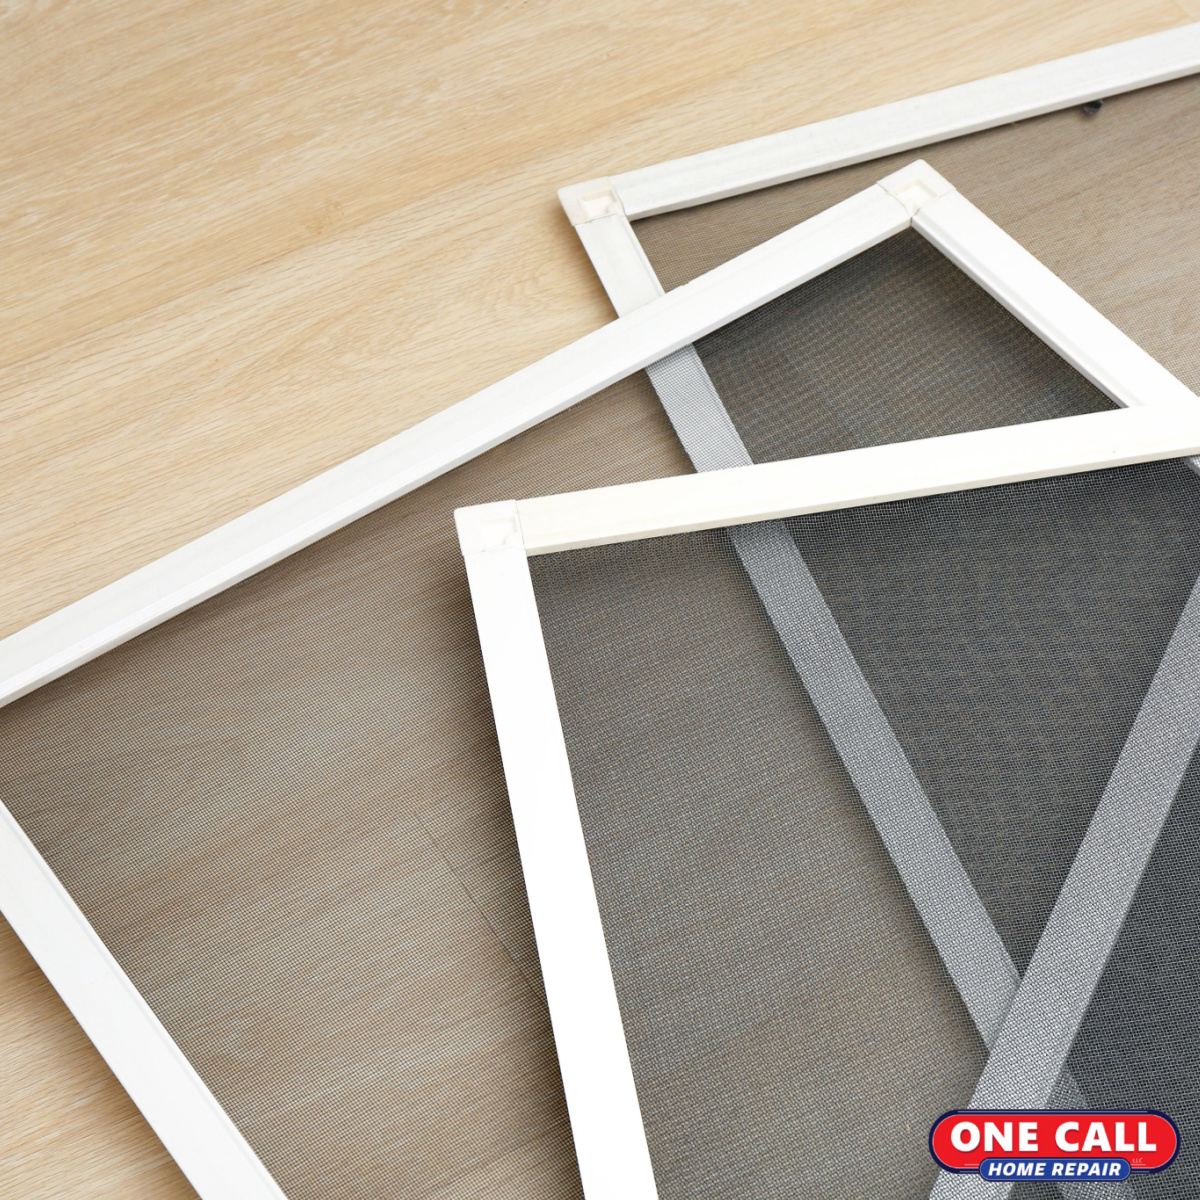 Ripped Window Screens? One Call Home Repair is Well-Equipped to Help!